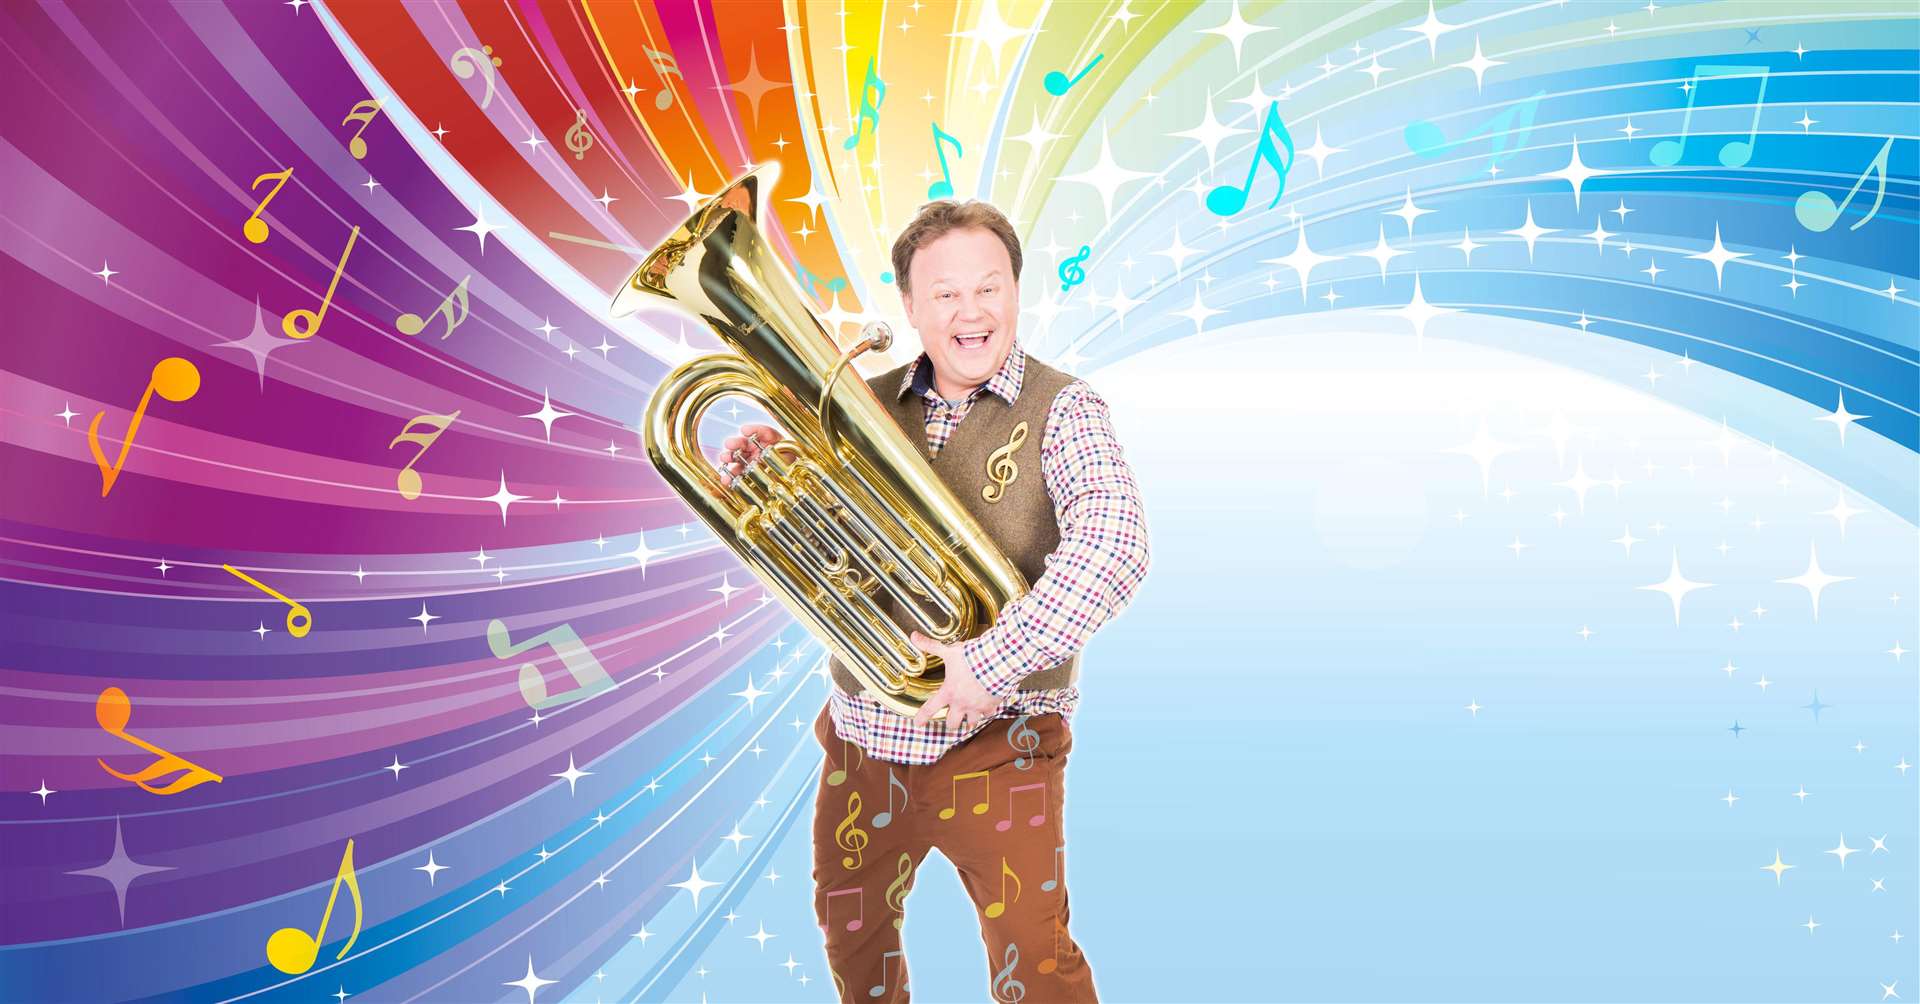 Justin Fletcher is among the visitors to Dreamland this summer